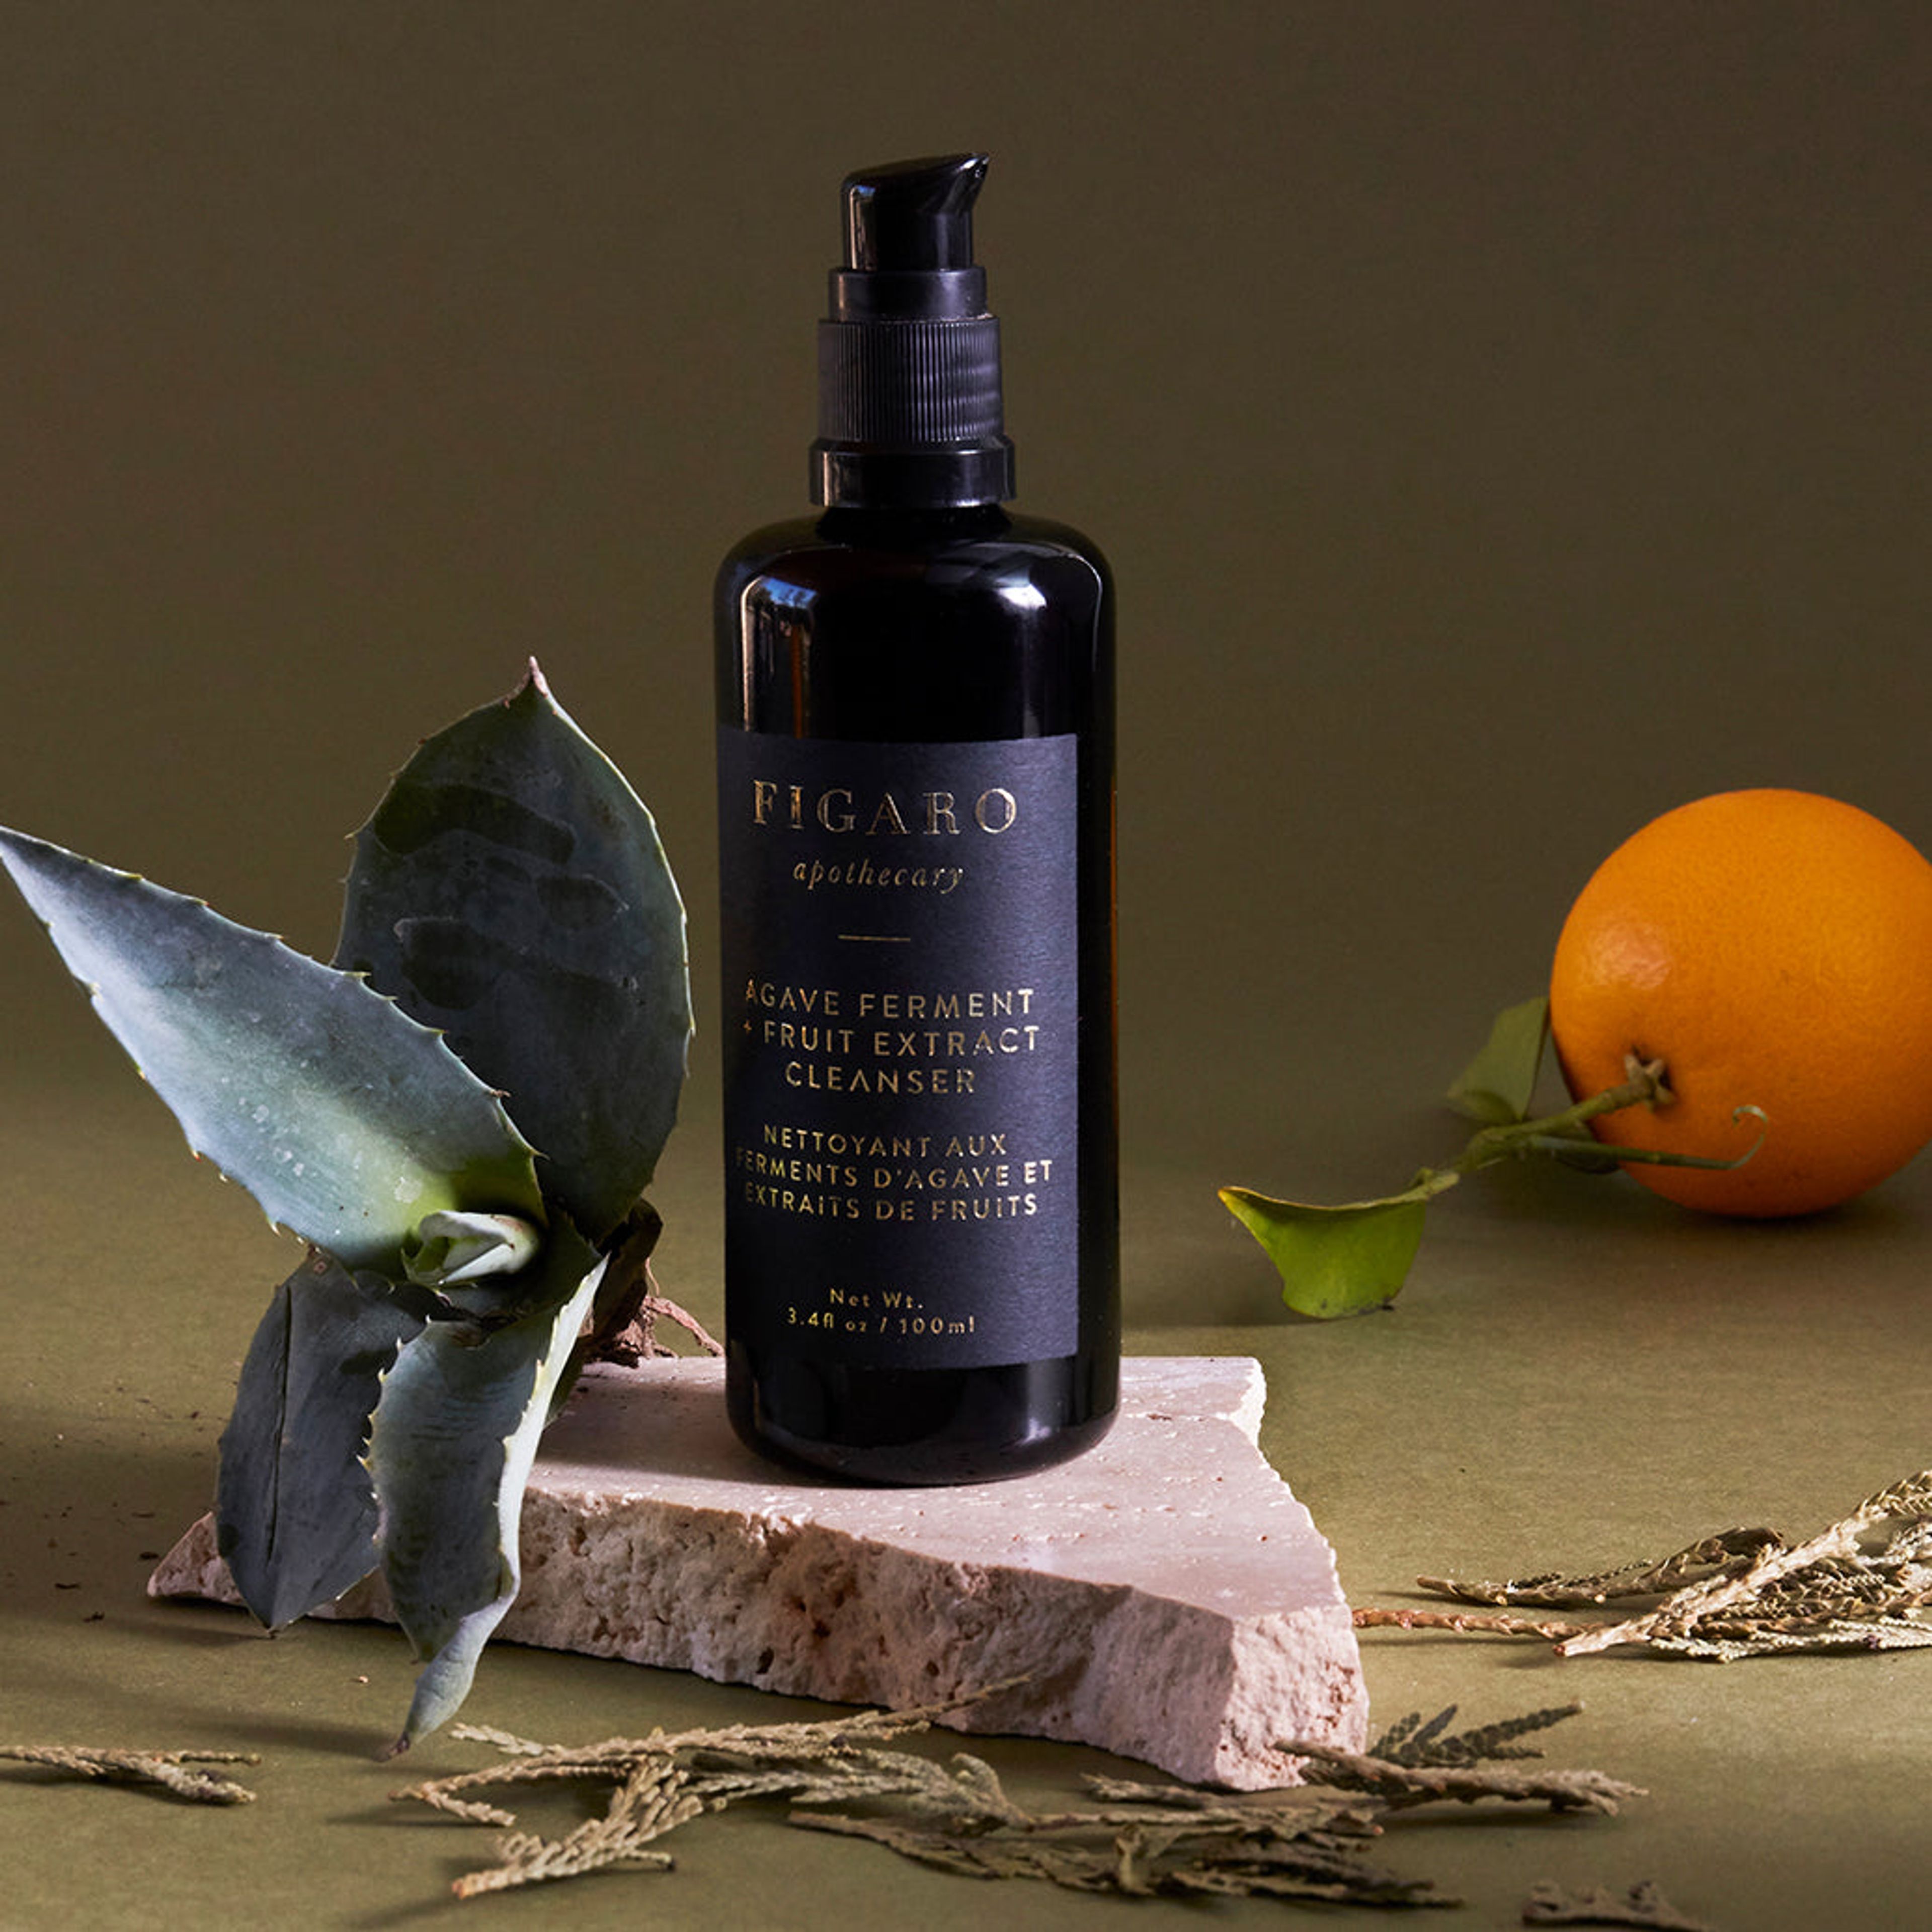 Agave Ferment + Fruit Extract Face Cleanser